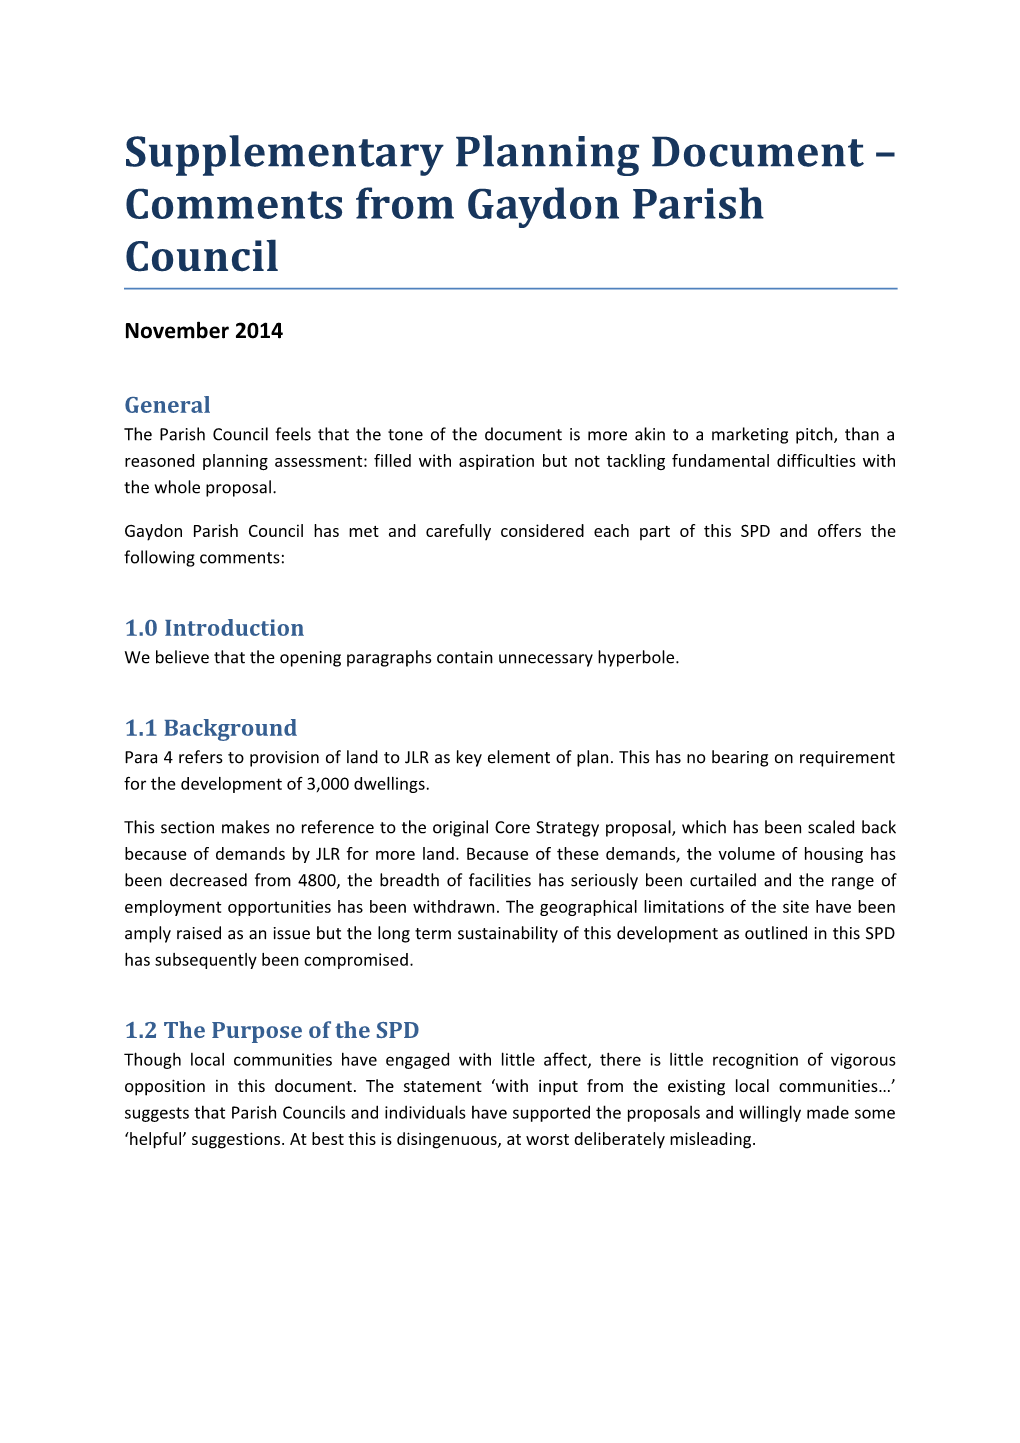 Supplementary Planning Document Comments from Gaydon Parish Council